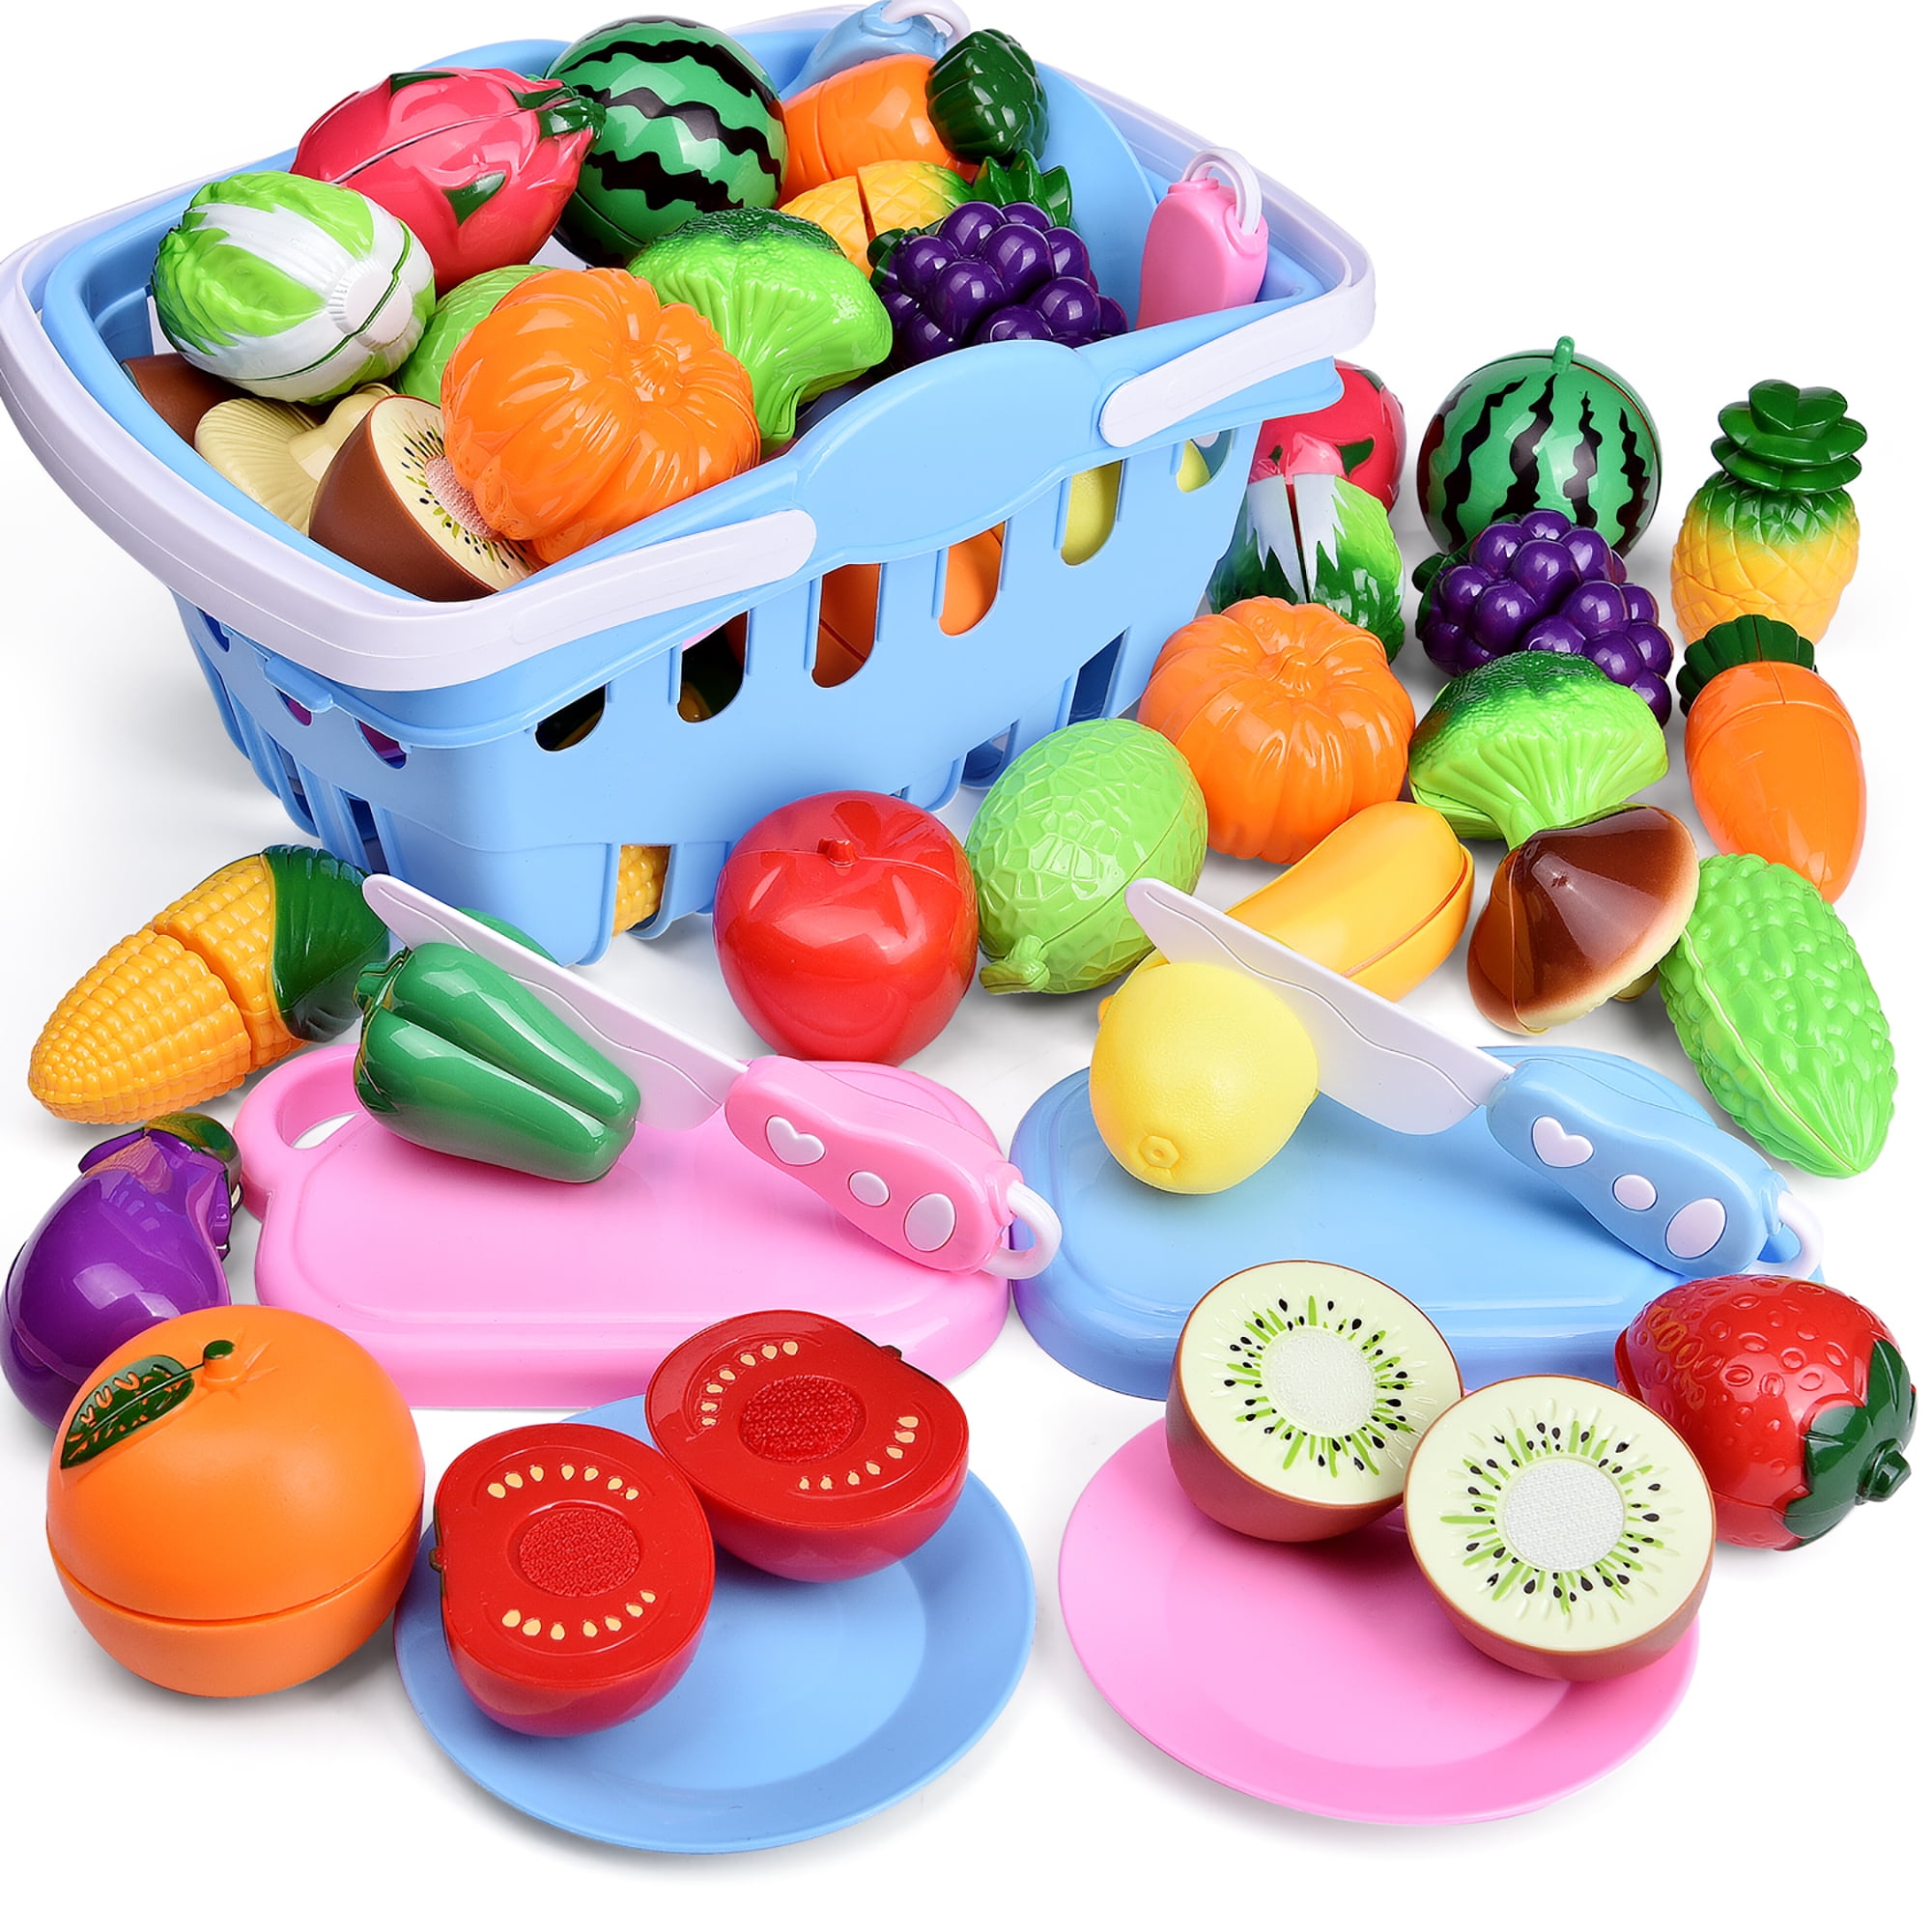 Lot of 3 18pcs Assorted Food ~ Cutable Sliceable Play Food NEW in bag. 